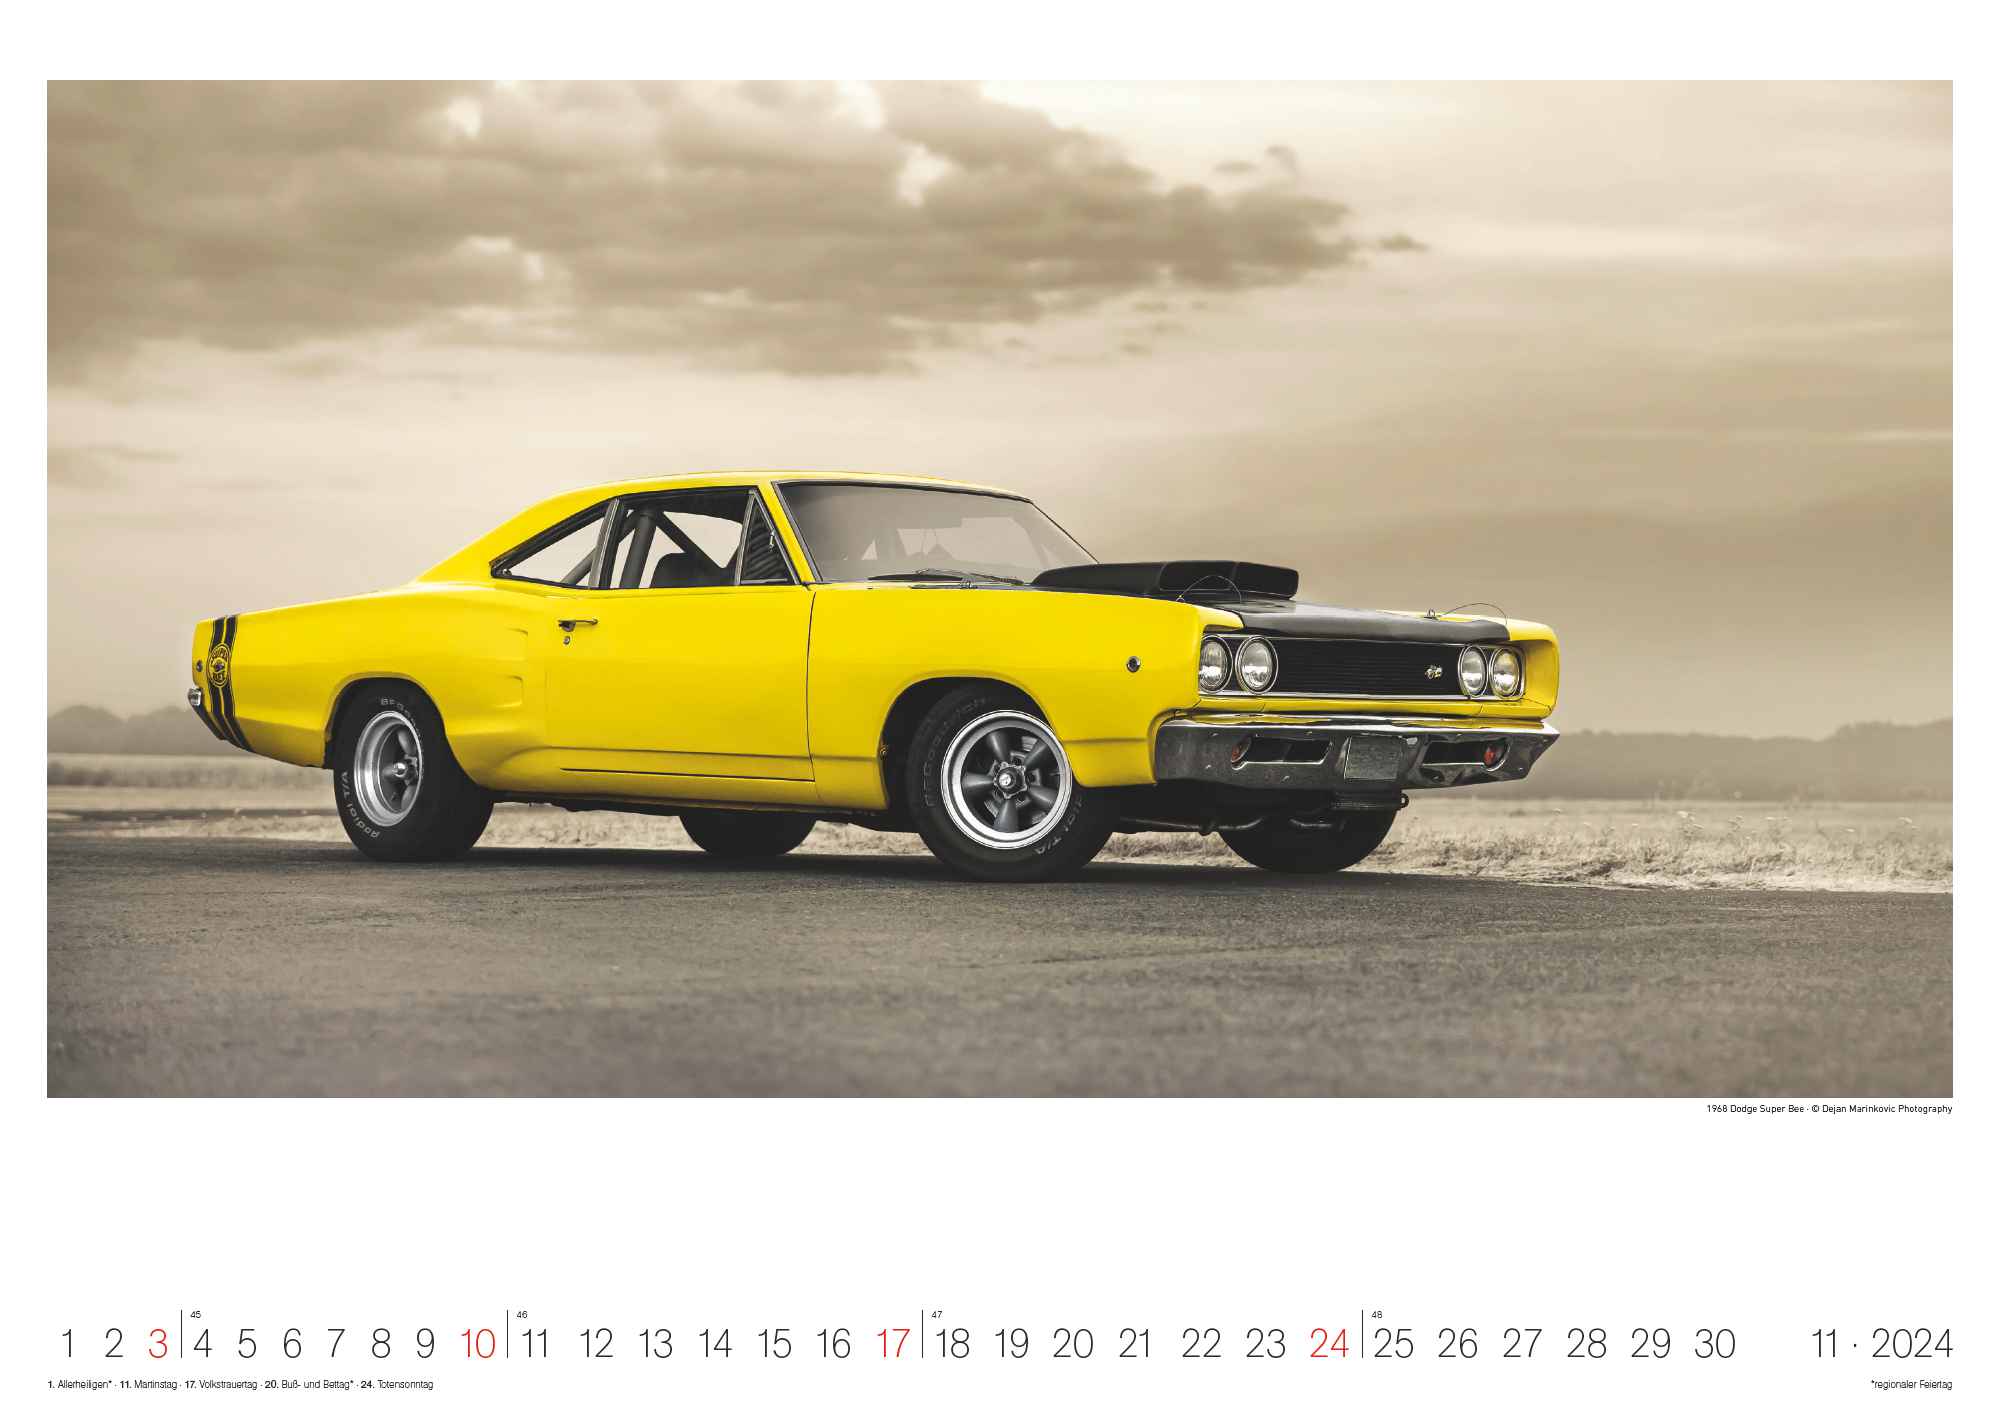 2024 Legendary Classic & Muscle Cars - Deluxe Wall Calendar